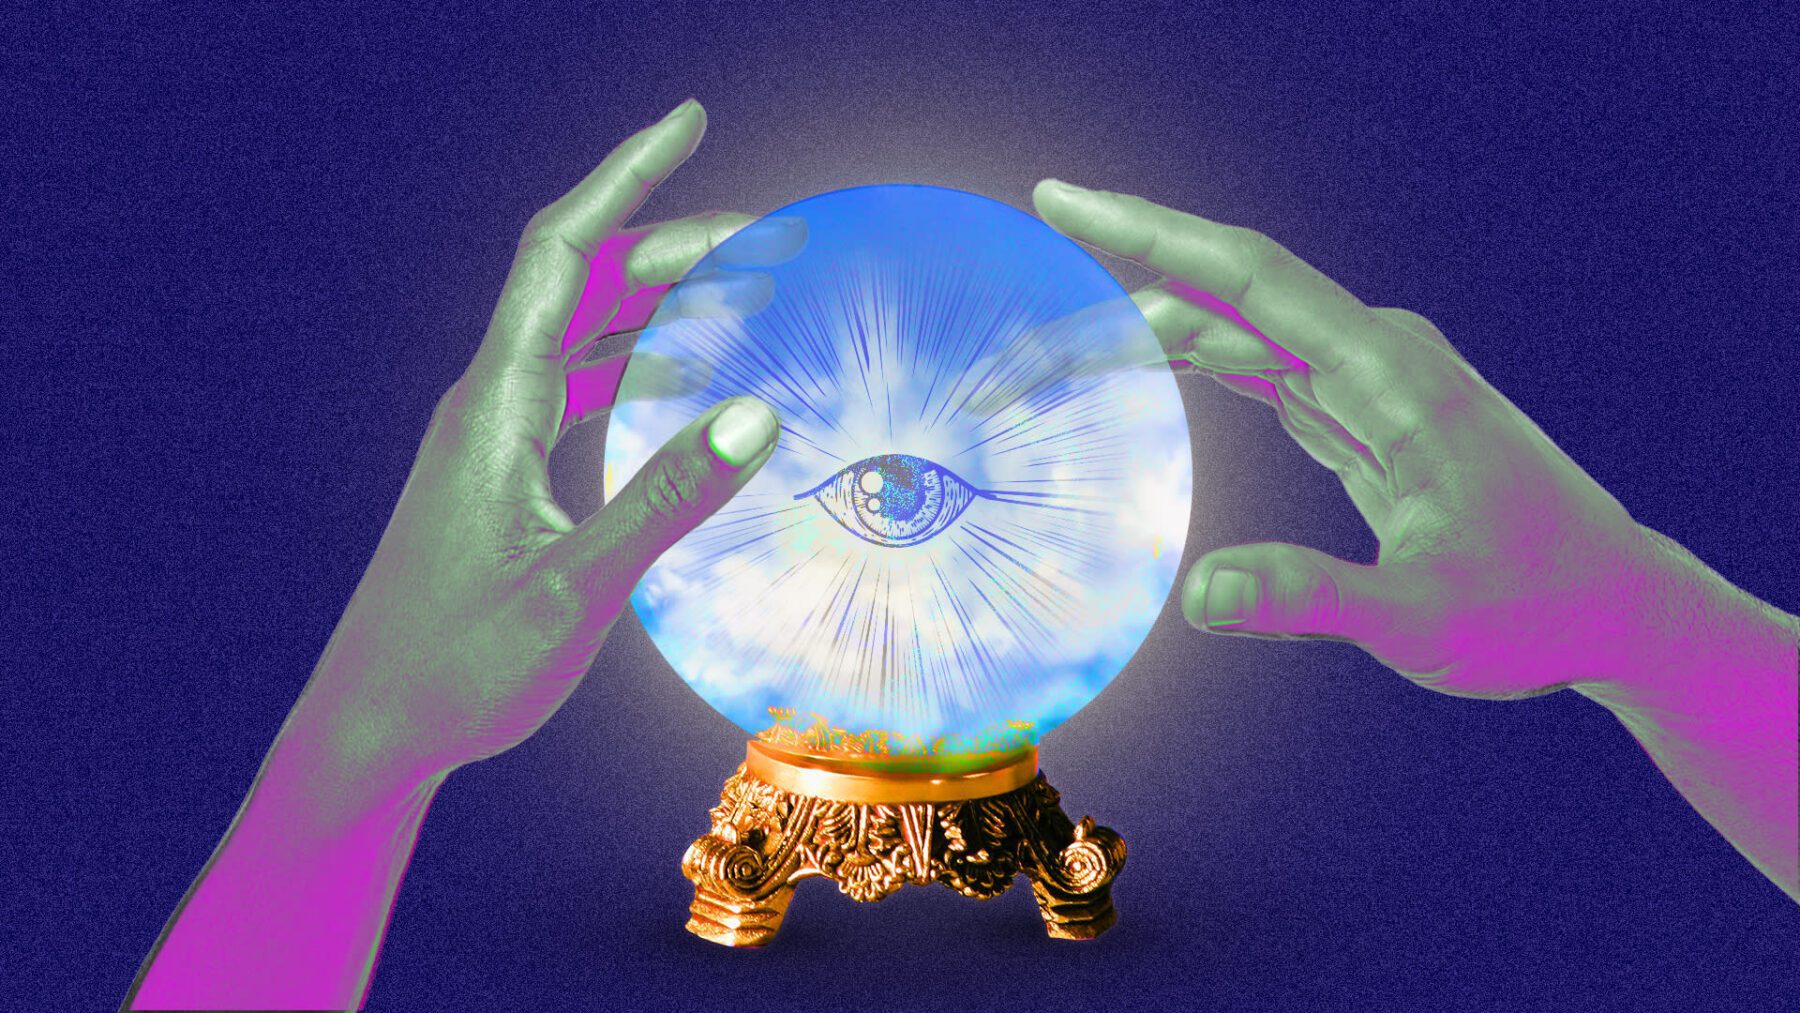 So you think you’re psychic? Déjà vu, ESP and premonitions: Experts break down how to tell the difference.